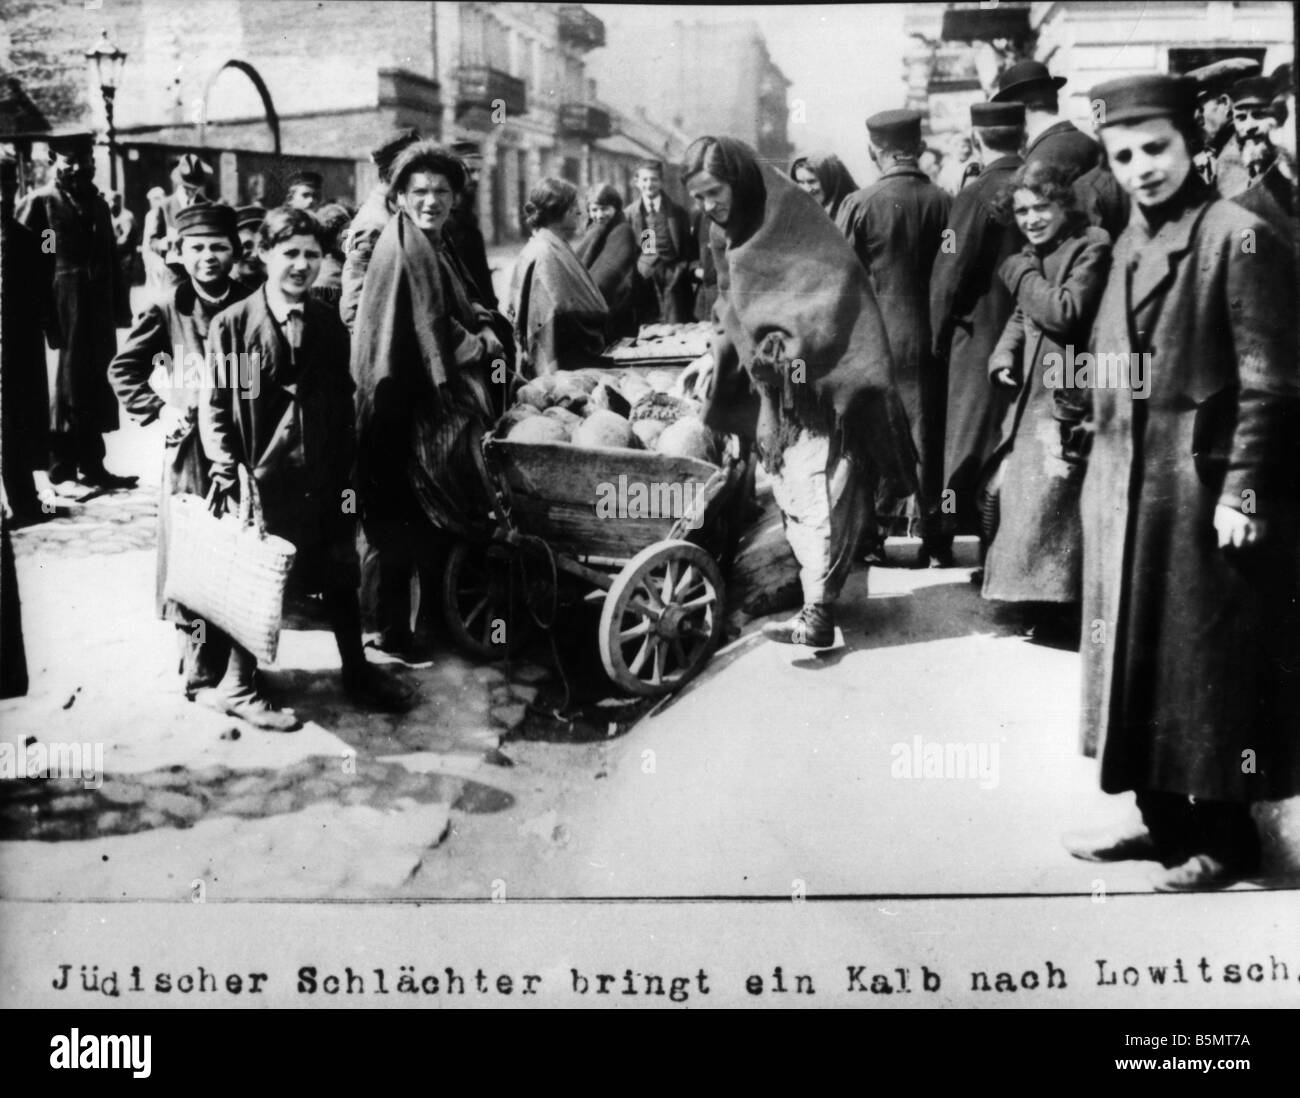 9IS 1915 0 0 A1 33 Jewish butcher in Lowitsch 1915 History of Judaism Eastern Jews Jewish butcher brings a calf to Lowitsch Lowi Stock Photo